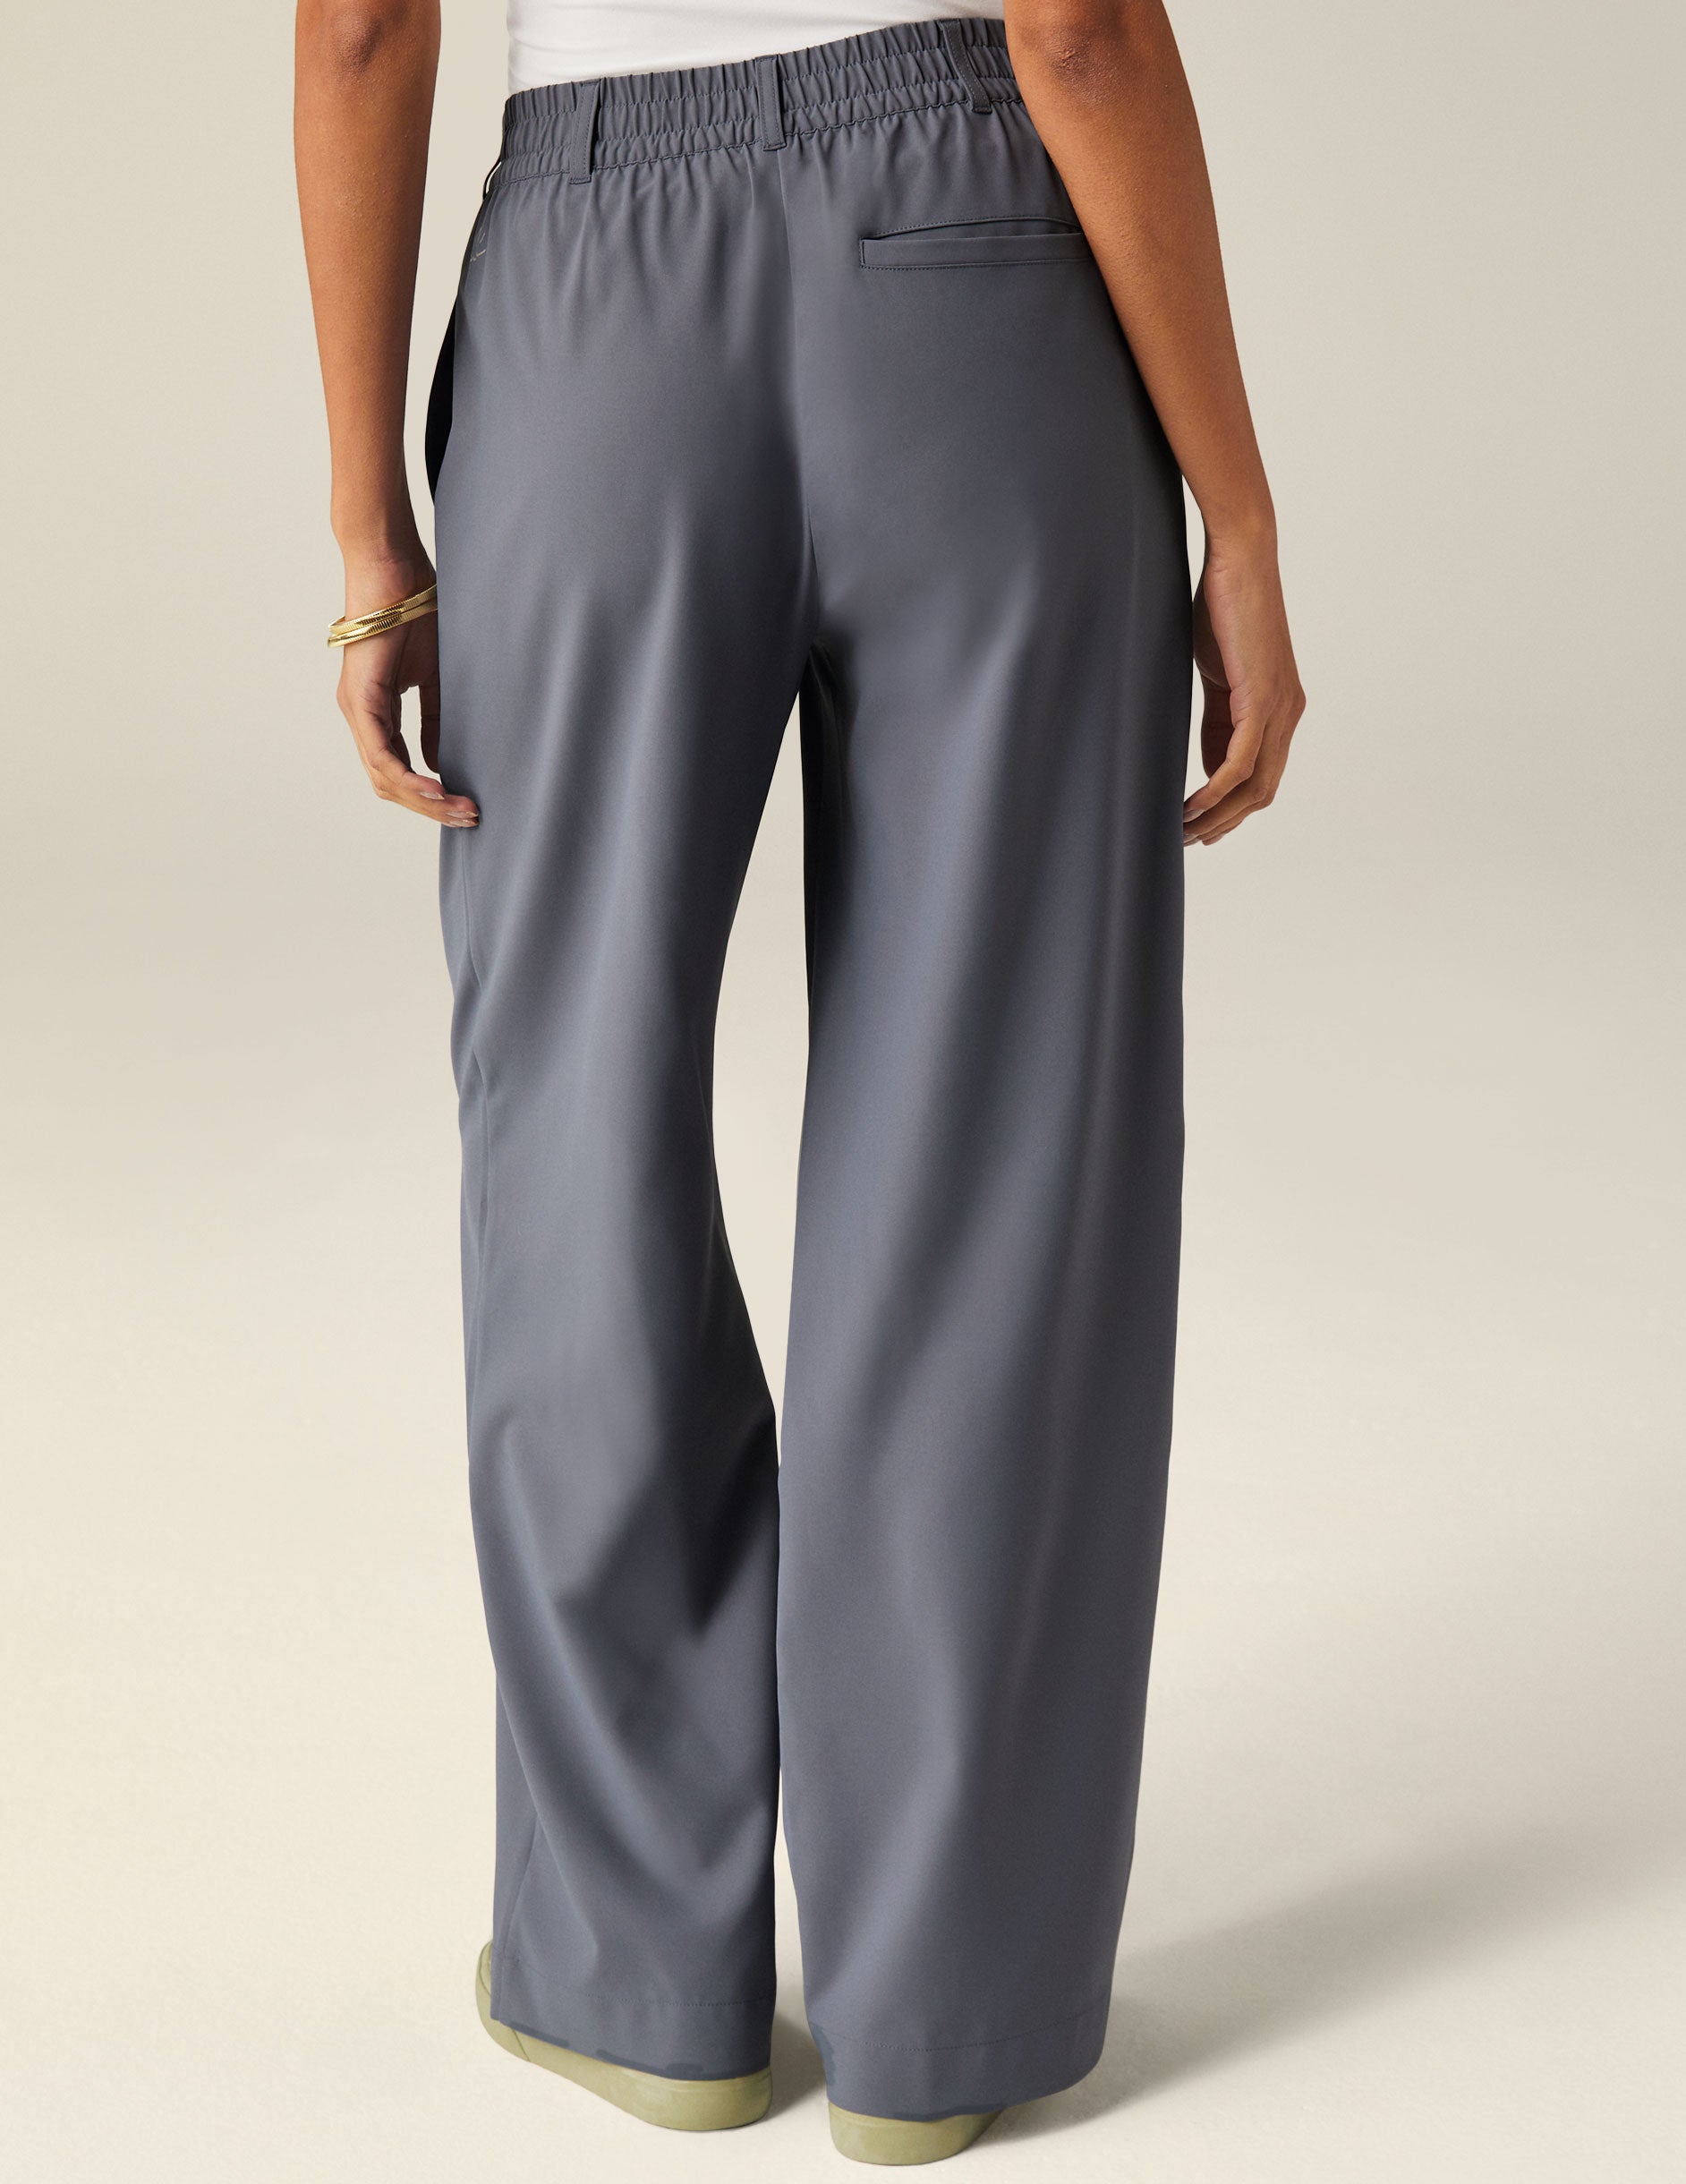 blue mid rise jetstretch woven pants with cargo style pockets. 